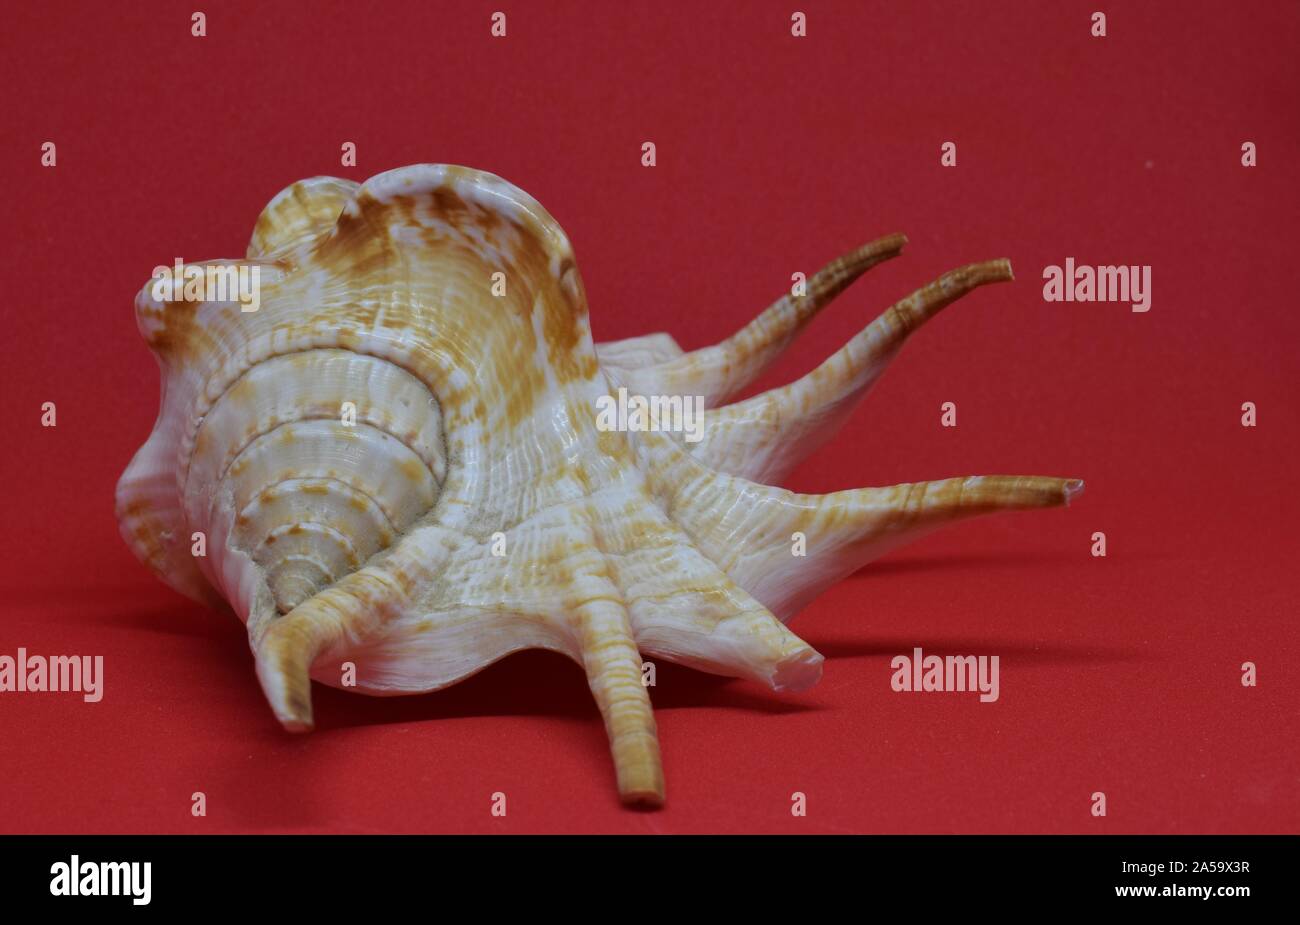 Sea shell front view on red background Stock Photo